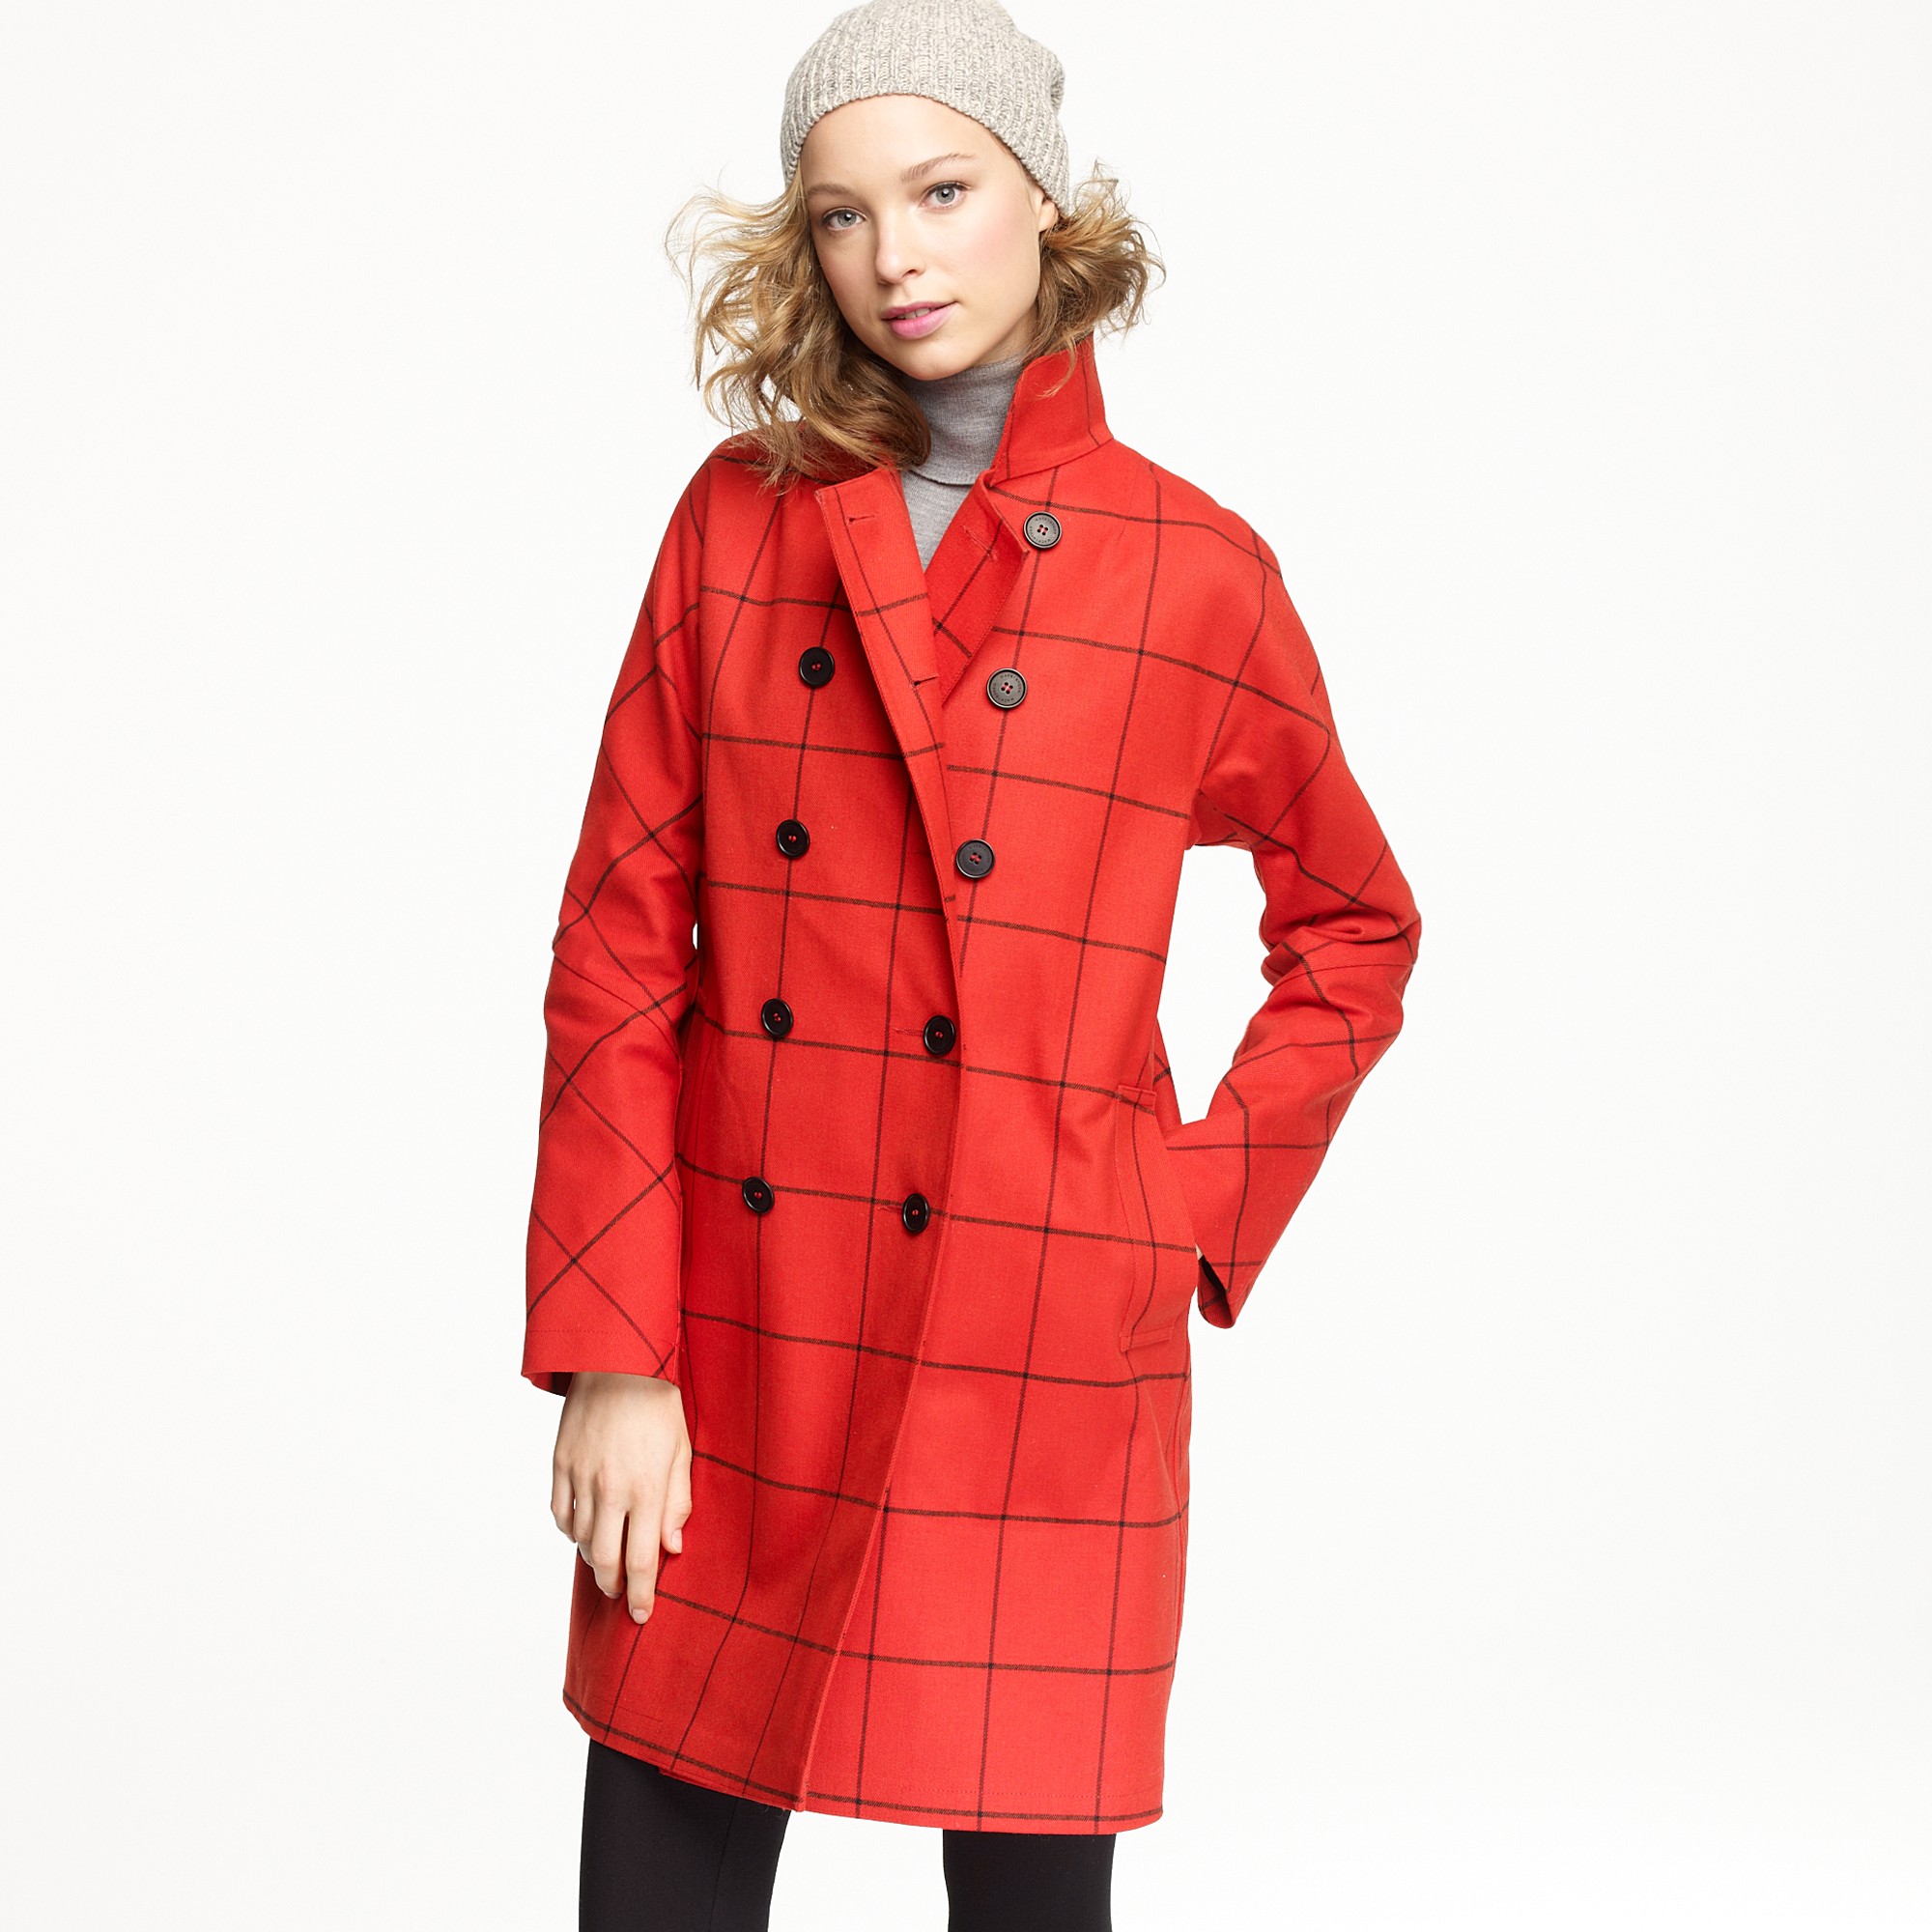 Lyst - J.Crew Mackintosh® Rousay Tattersall Coat in Wool in Red